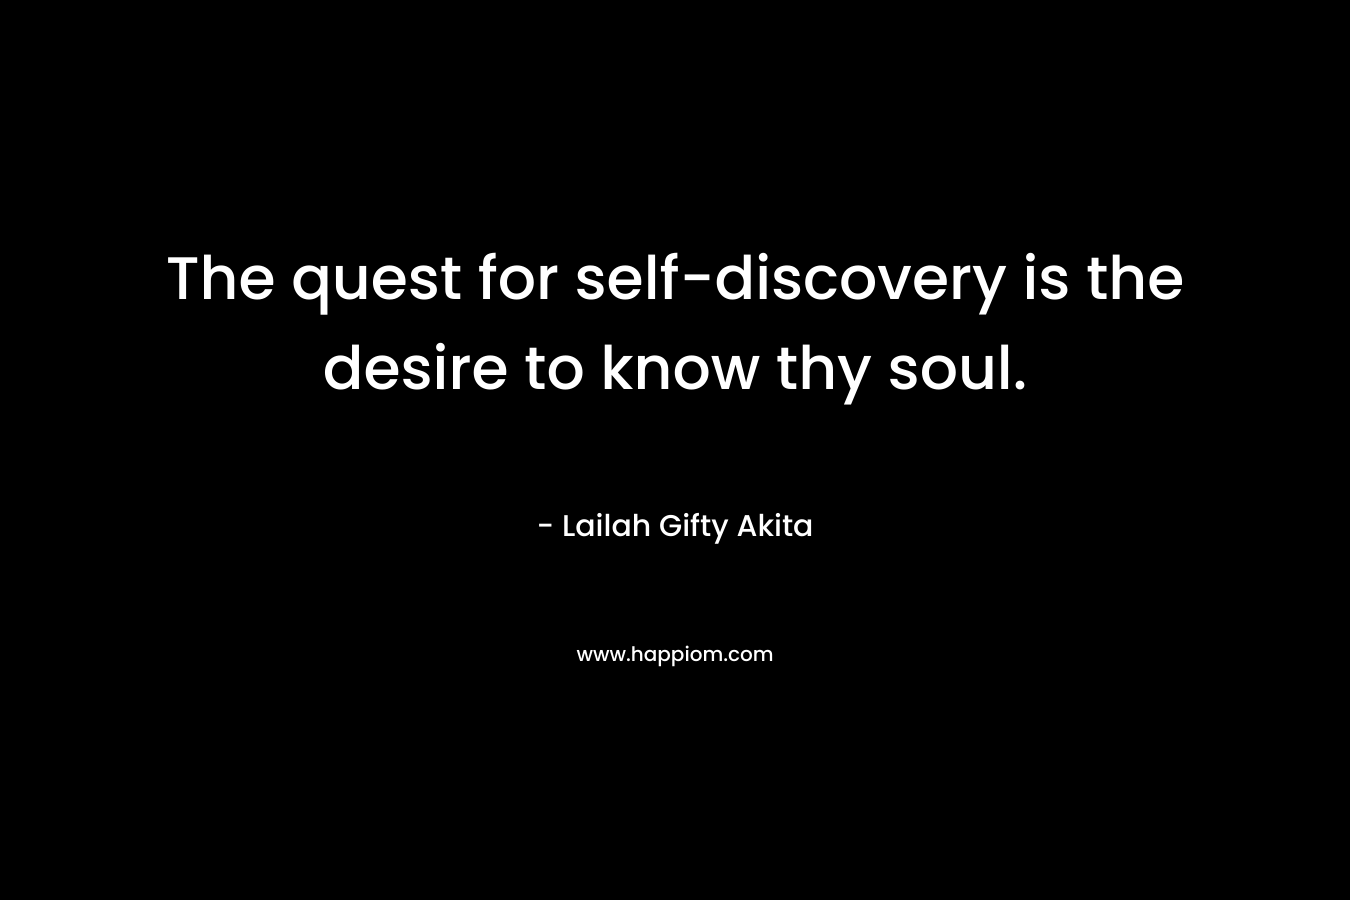 The quest for self-discovery is the desire to know thy soul.